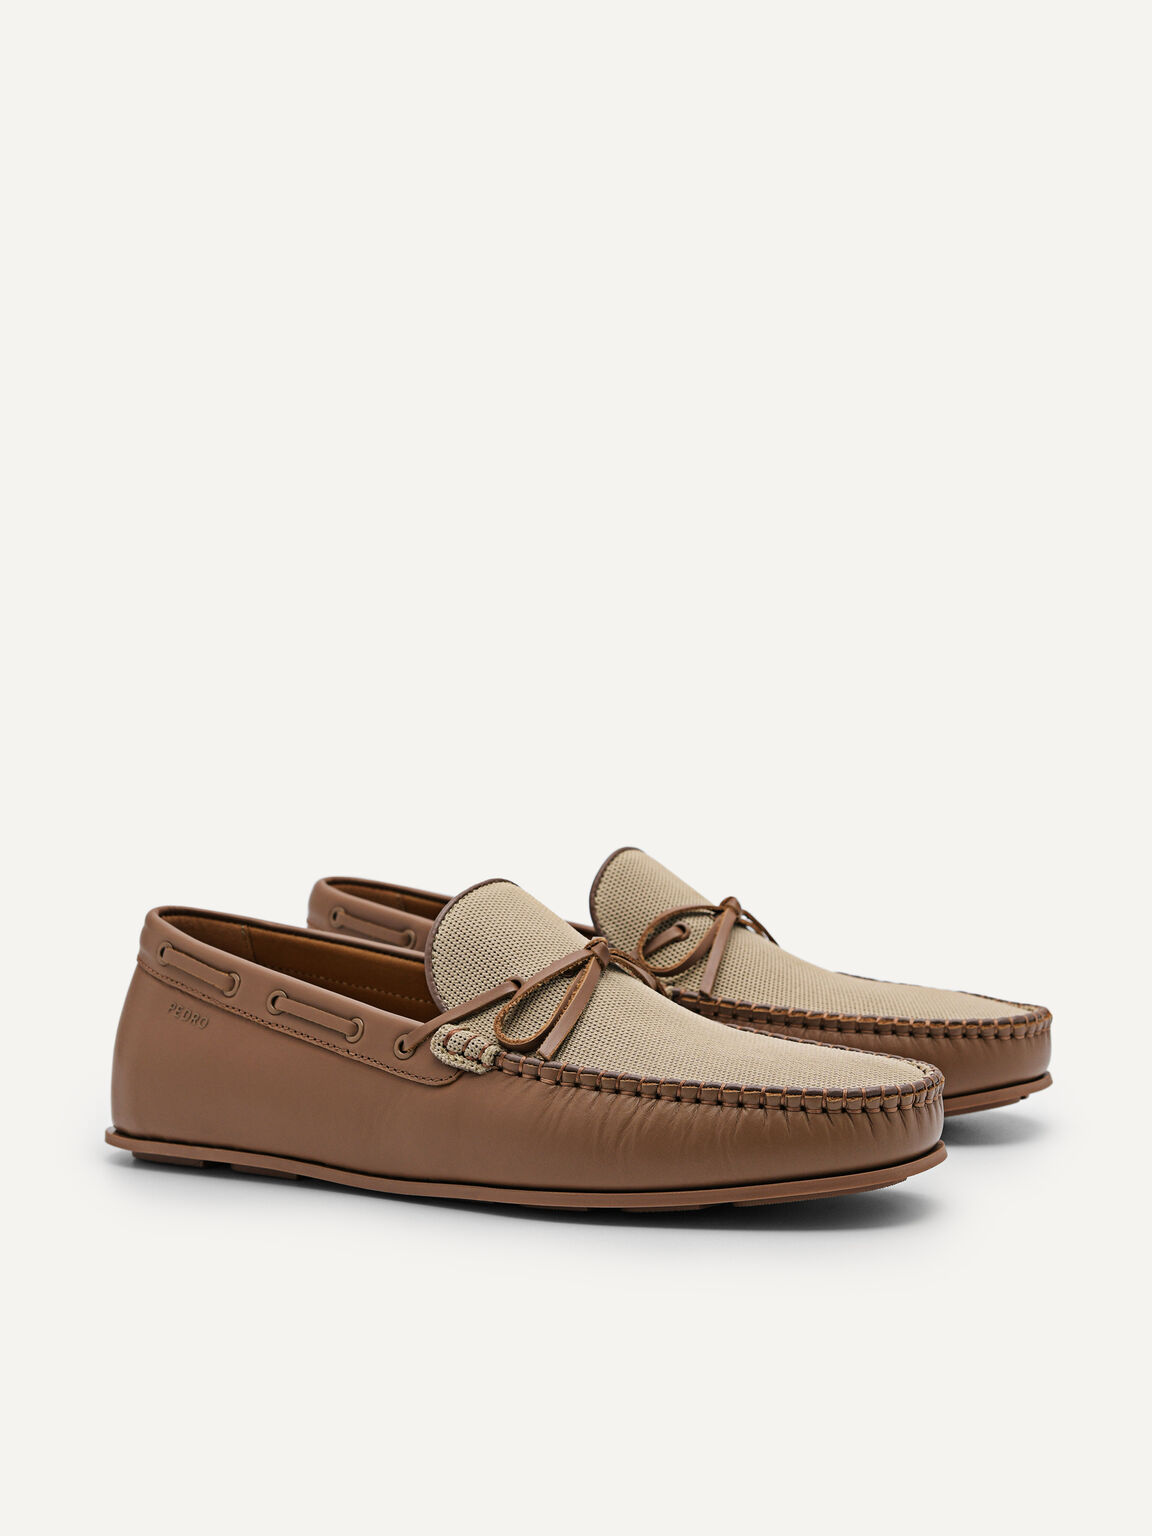 Leather Bow Moccasins, Camel